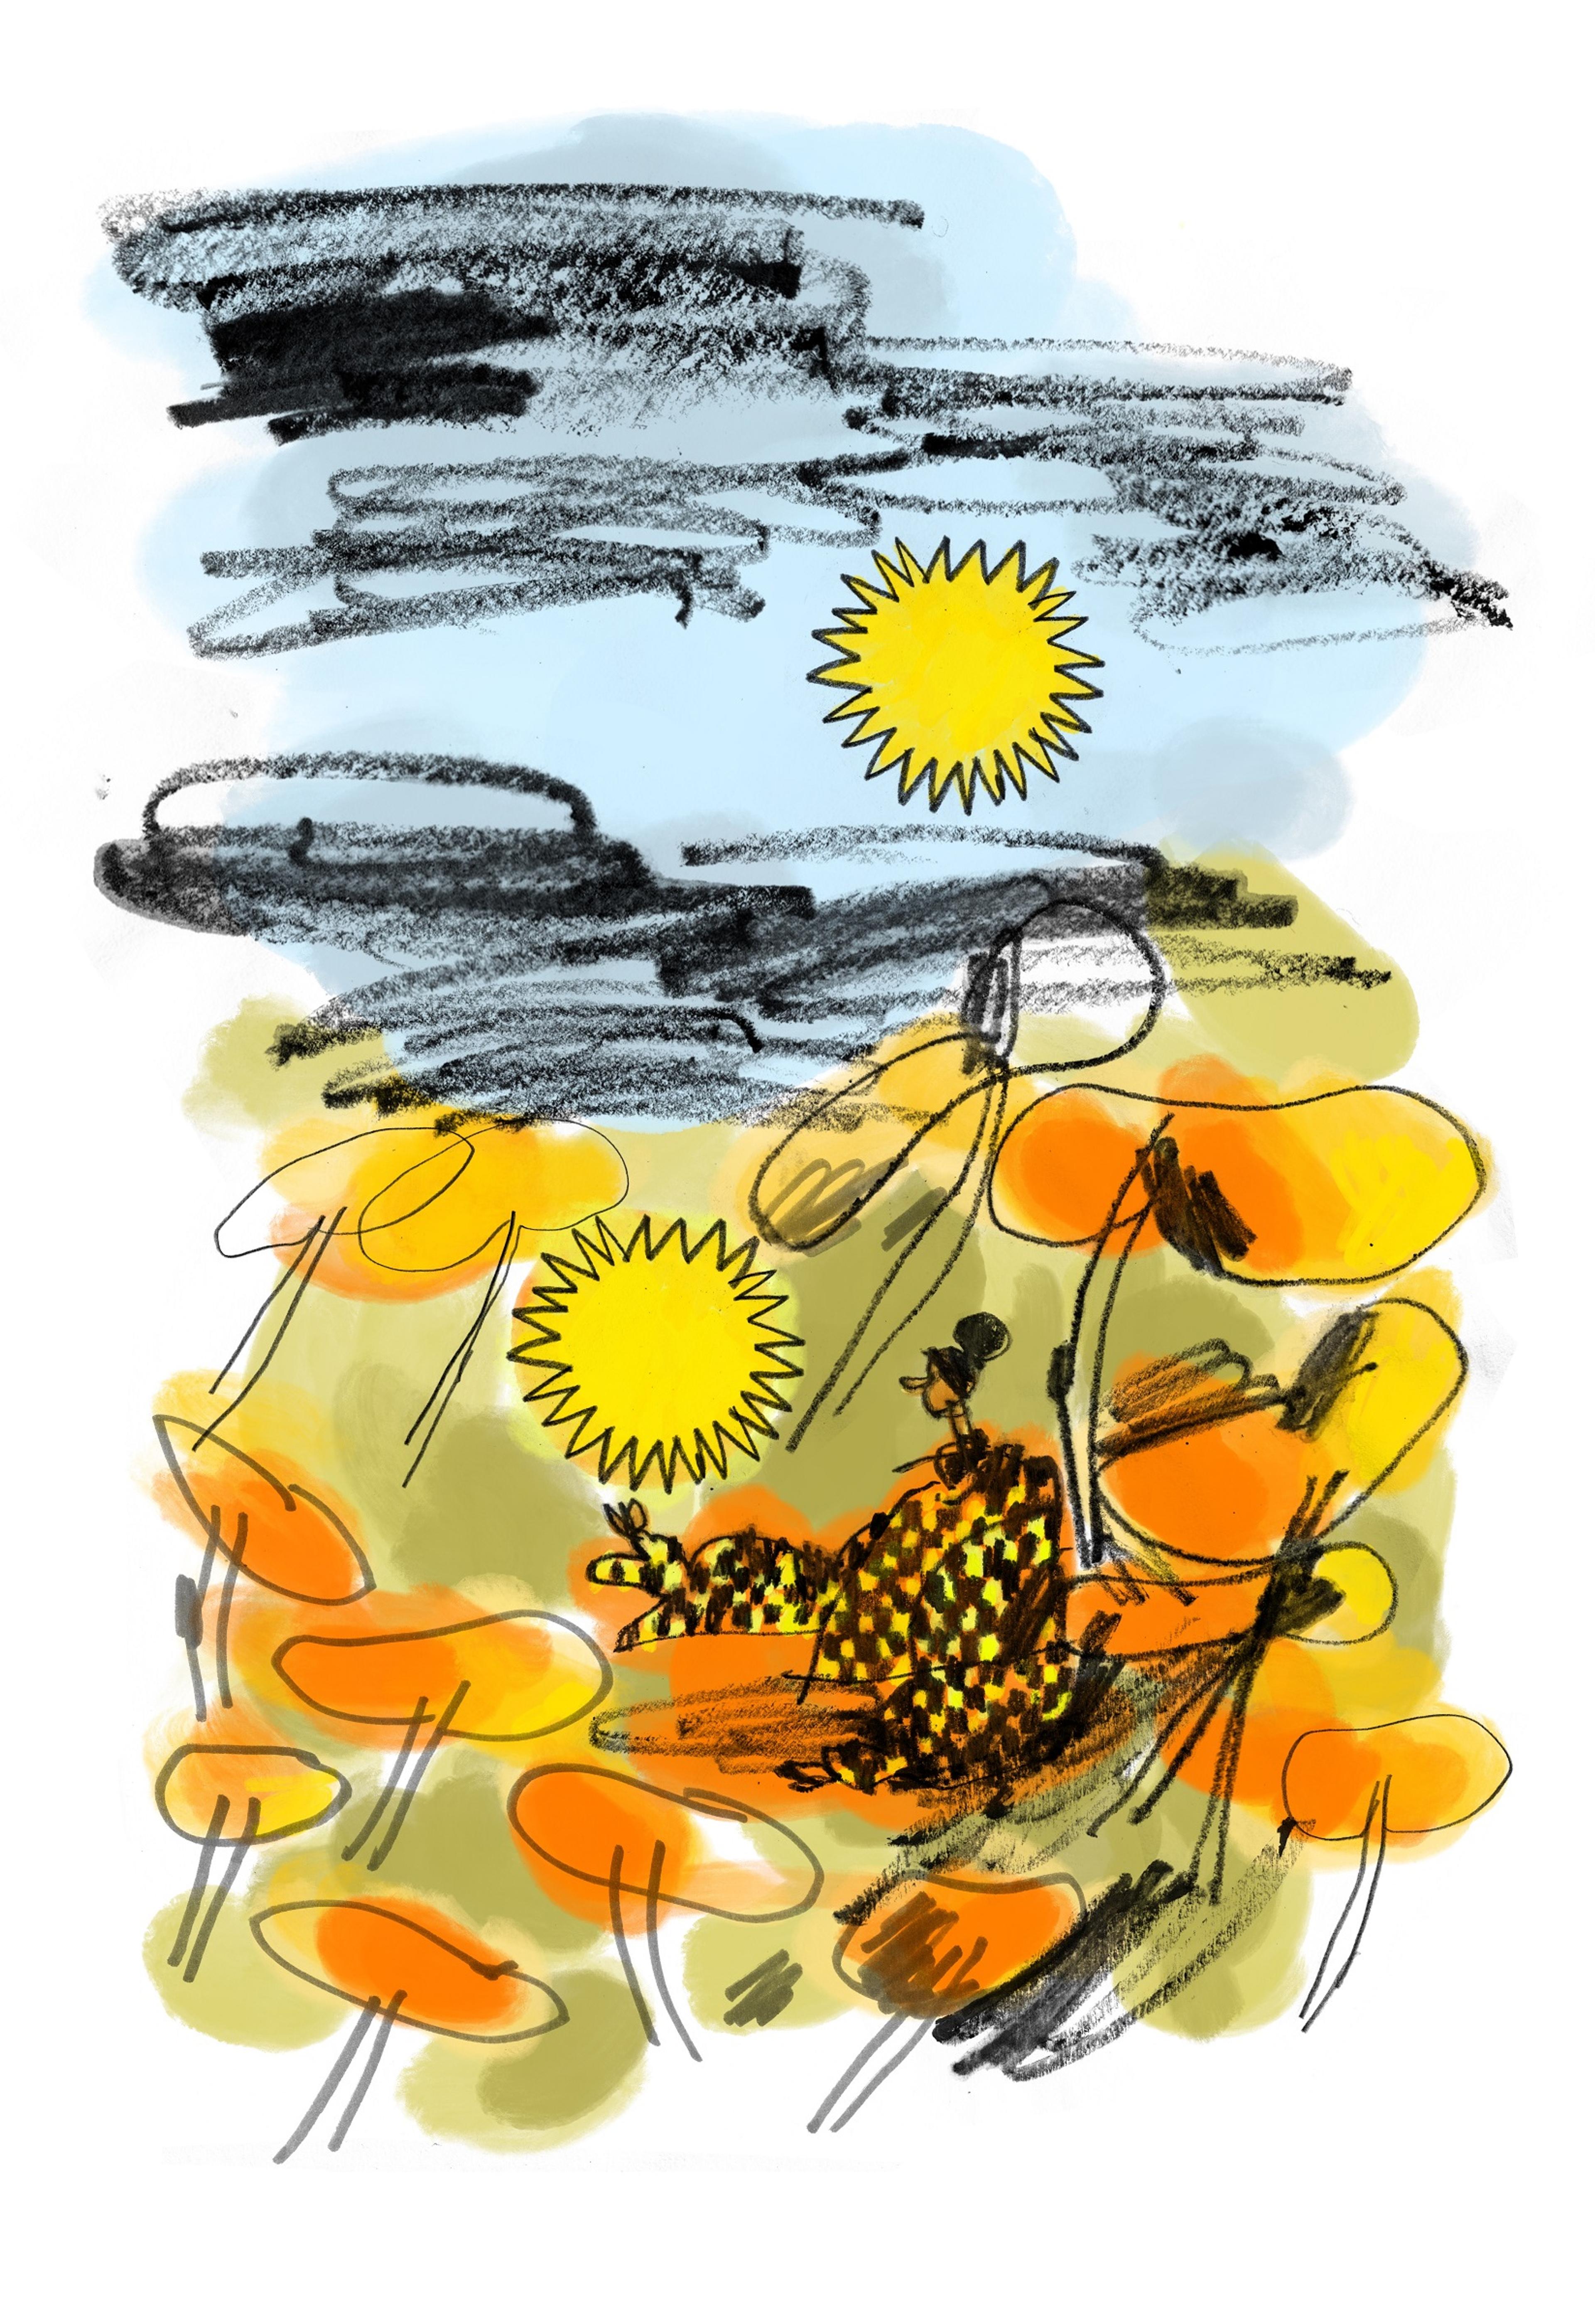 Illustration of a person surrounded by flora, with a yellow spark in front of them